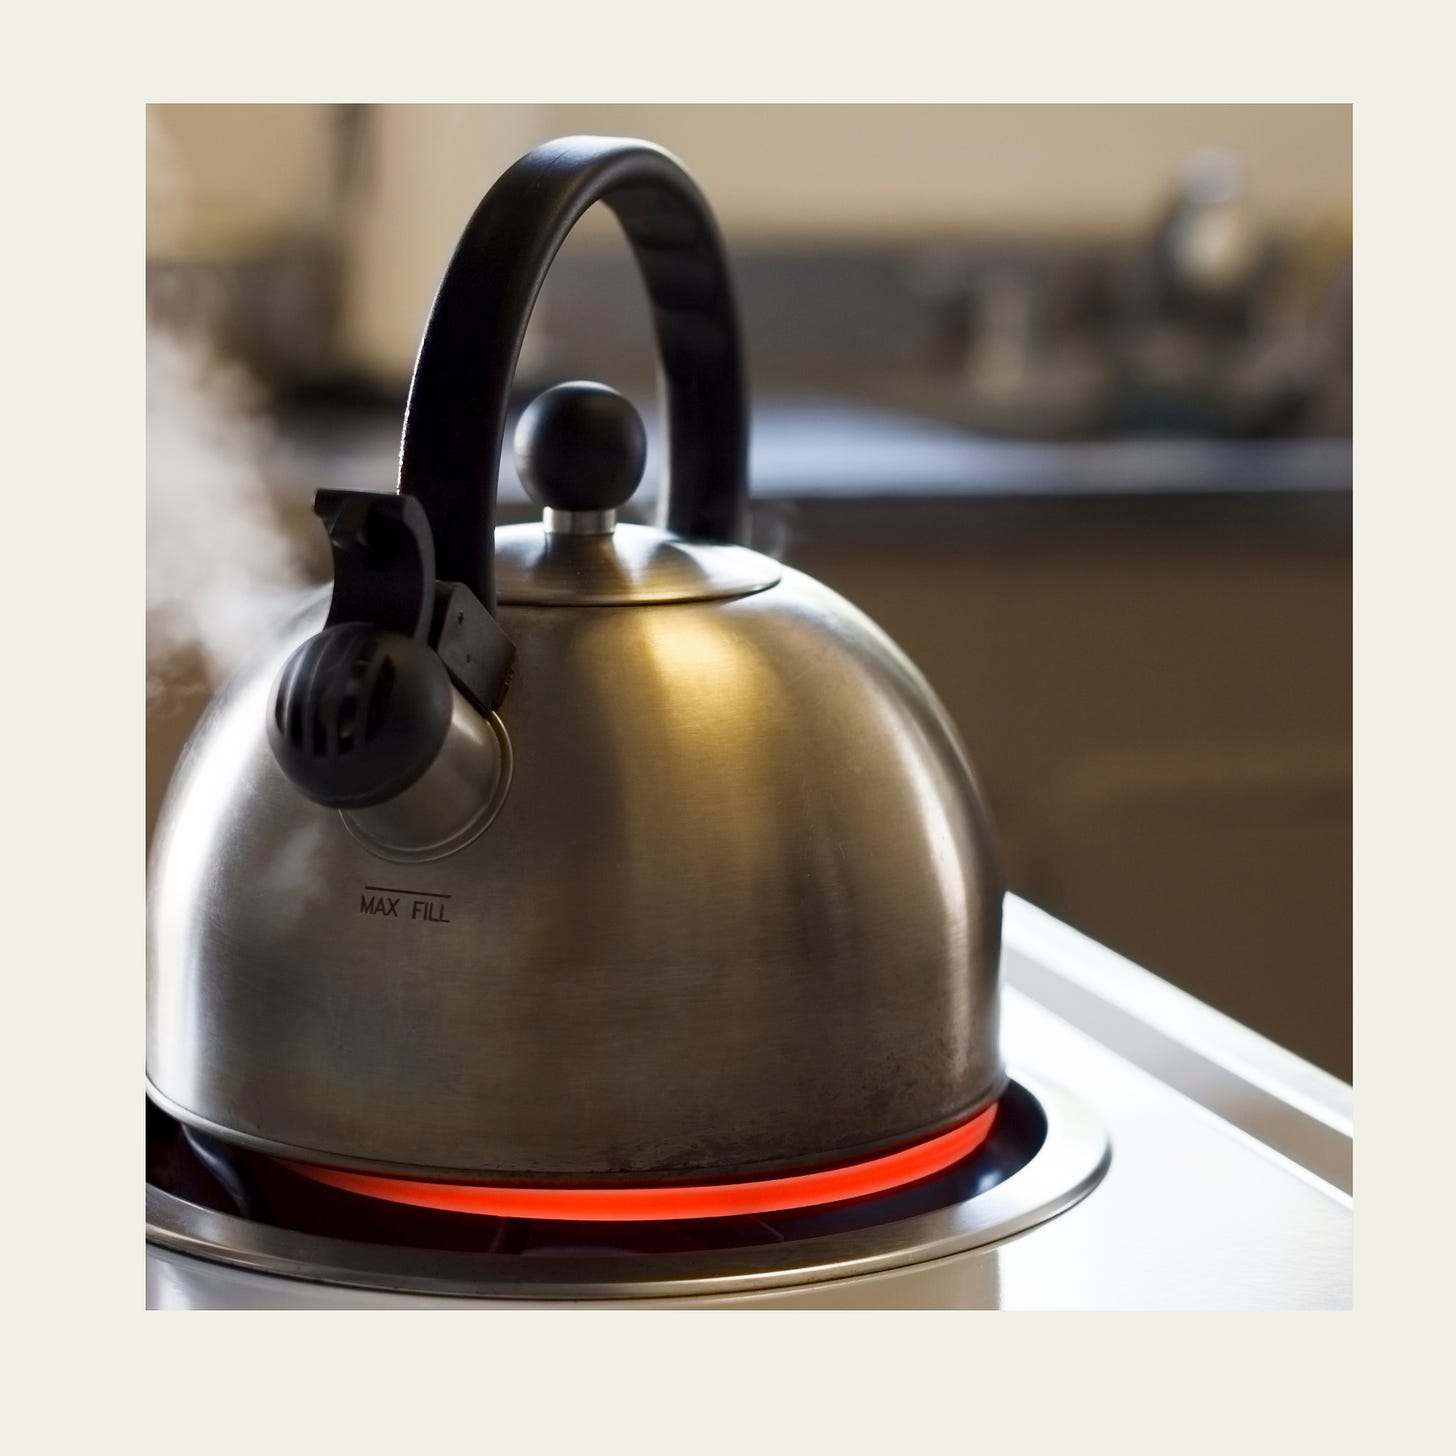 Tea kettle about to boil